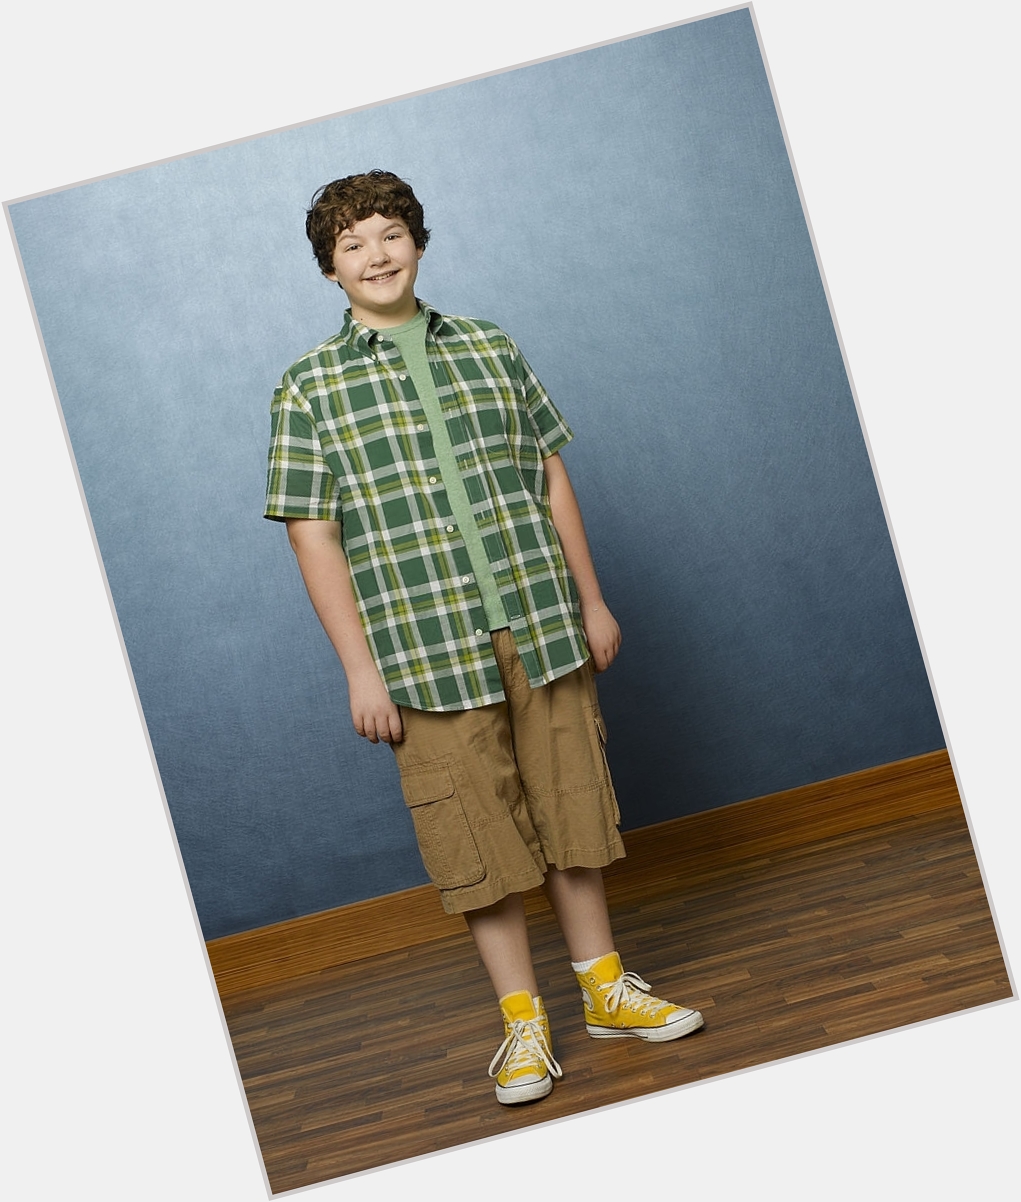 Happy Birthday, Aedin Mincks
For Disney, he protrayed Angus Chestnut in the Disney Channel comedy series 